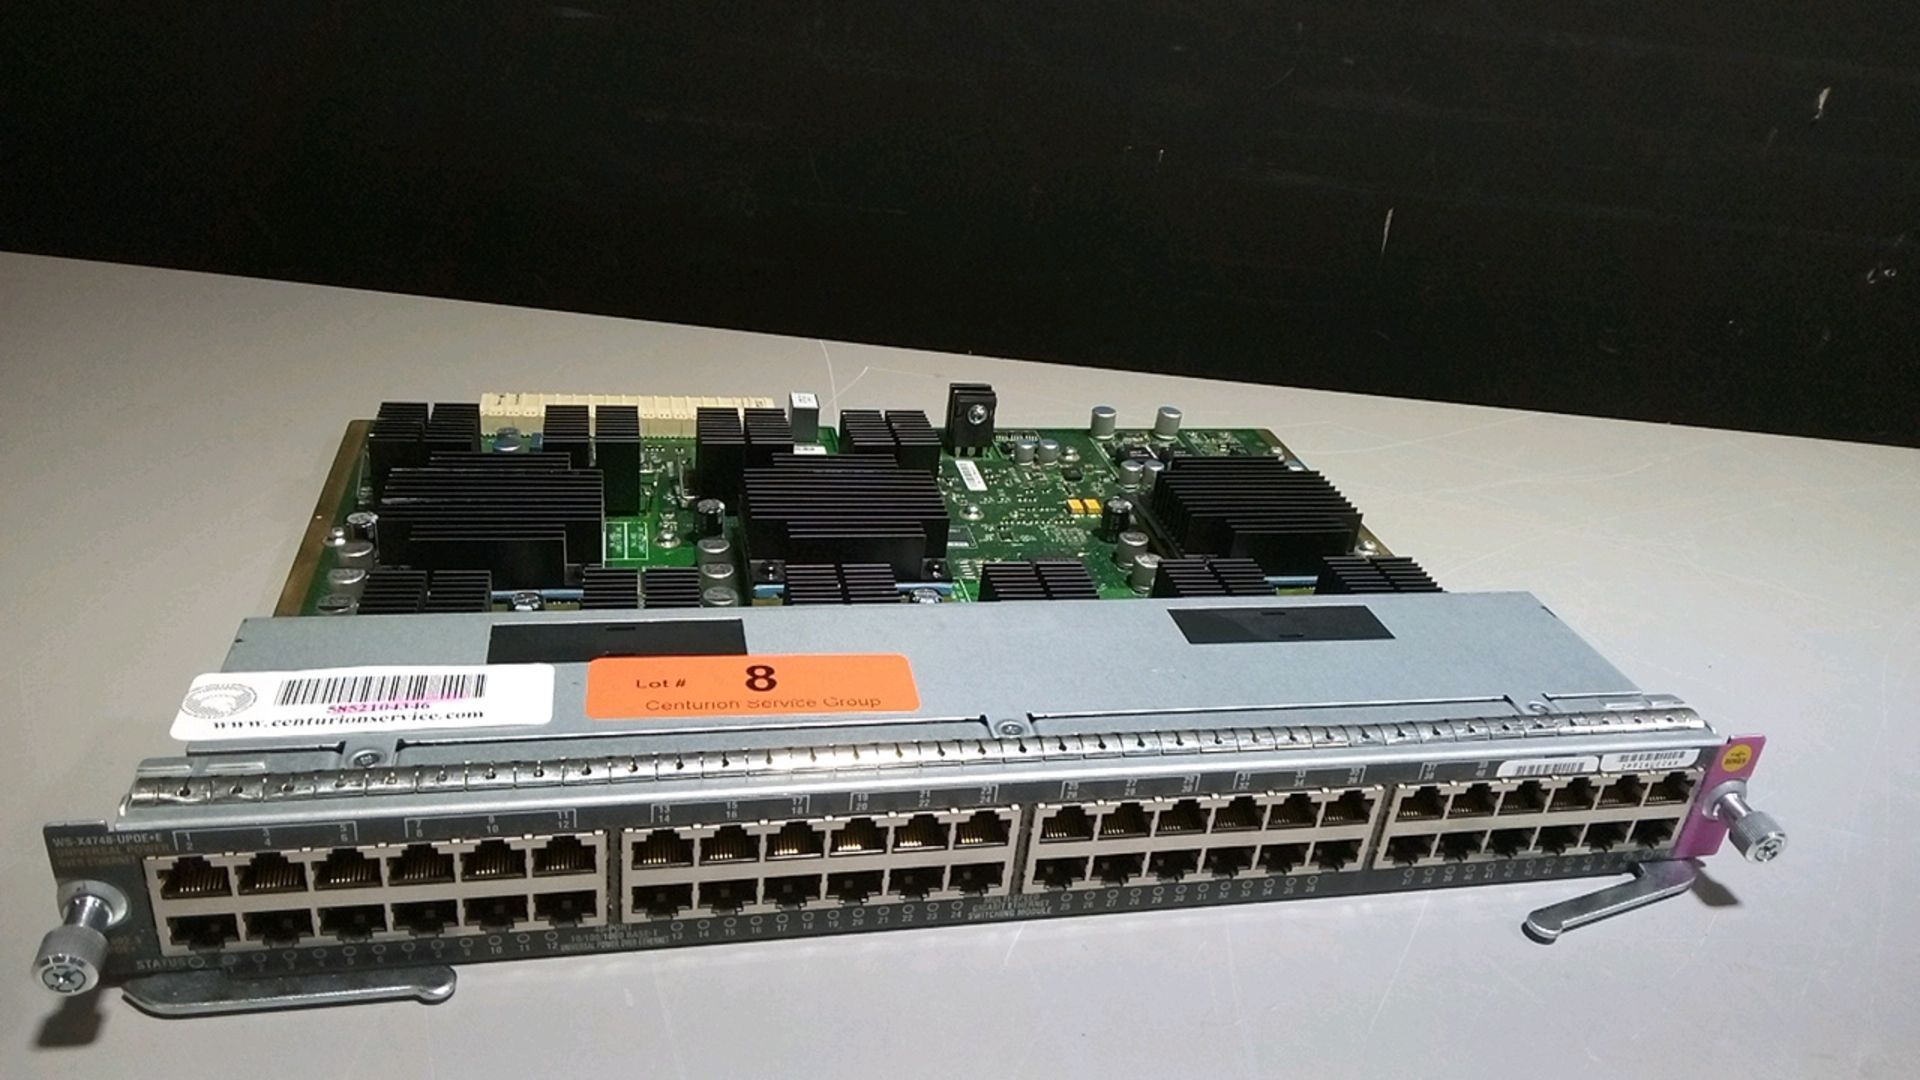 CISCO SYSTEMS WS-X4748-UPOE+E SWITCH LOCATED AT: 2440 GREENLEAF AVE, ELK GROVE VILLAGE IL